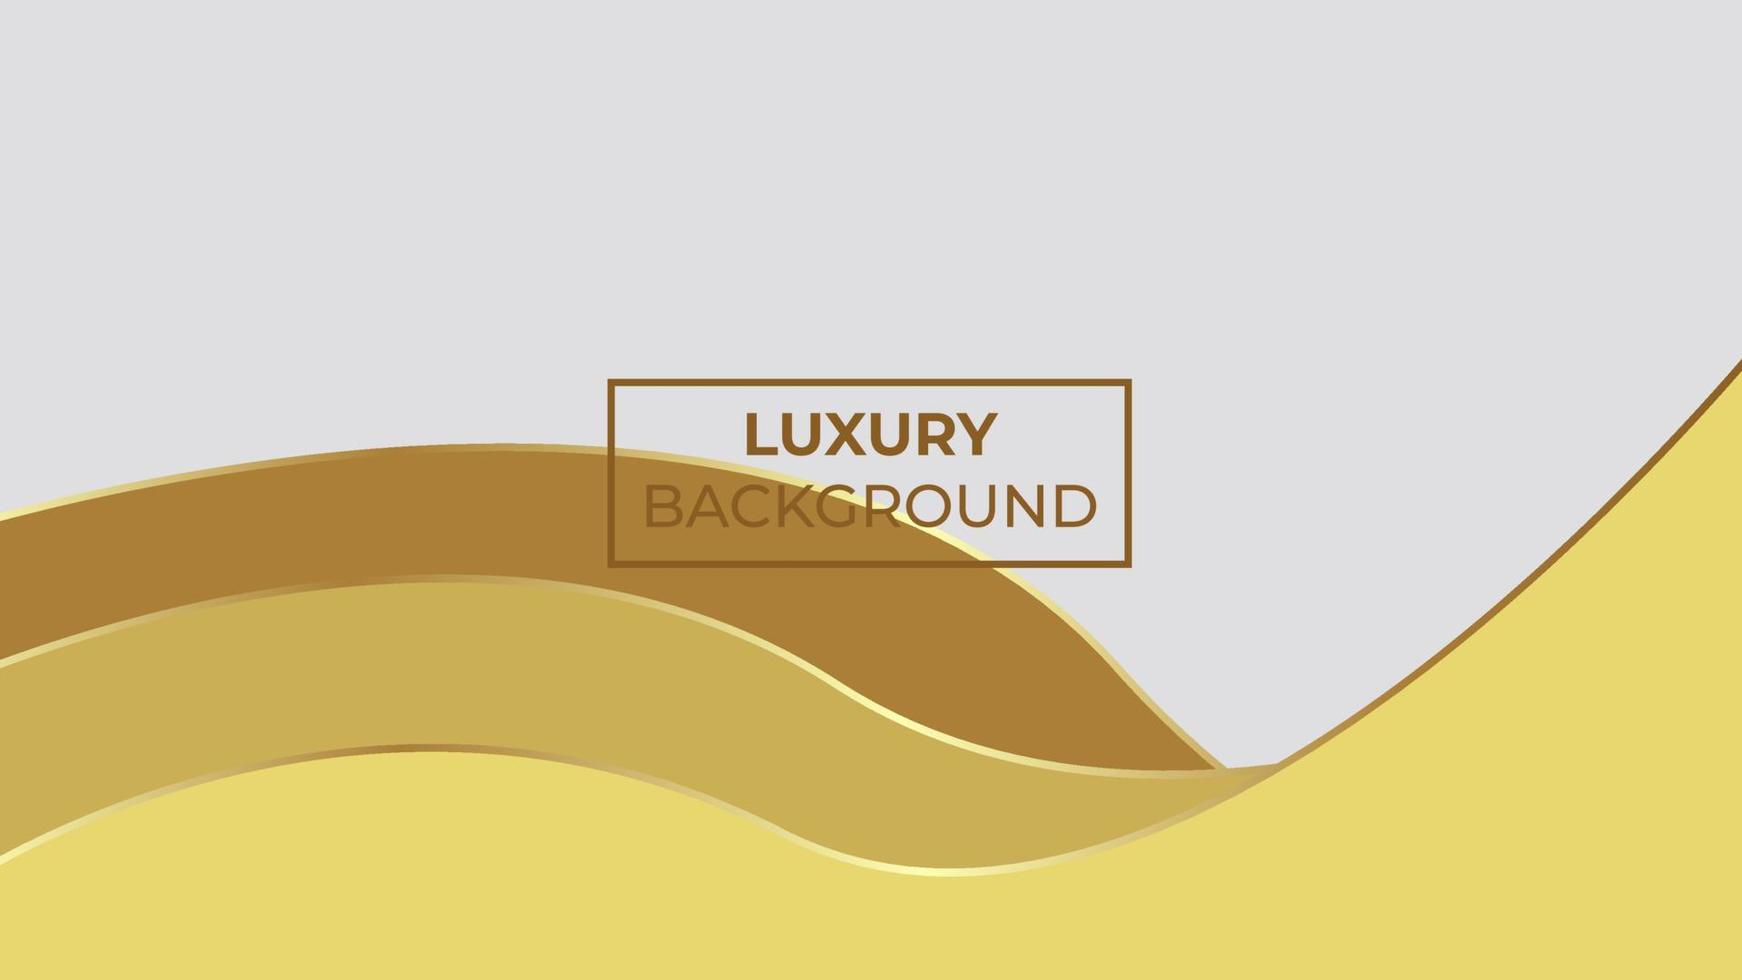 Luxury Background with three overlapping liquids in gold and silver colors, easy to edit vector